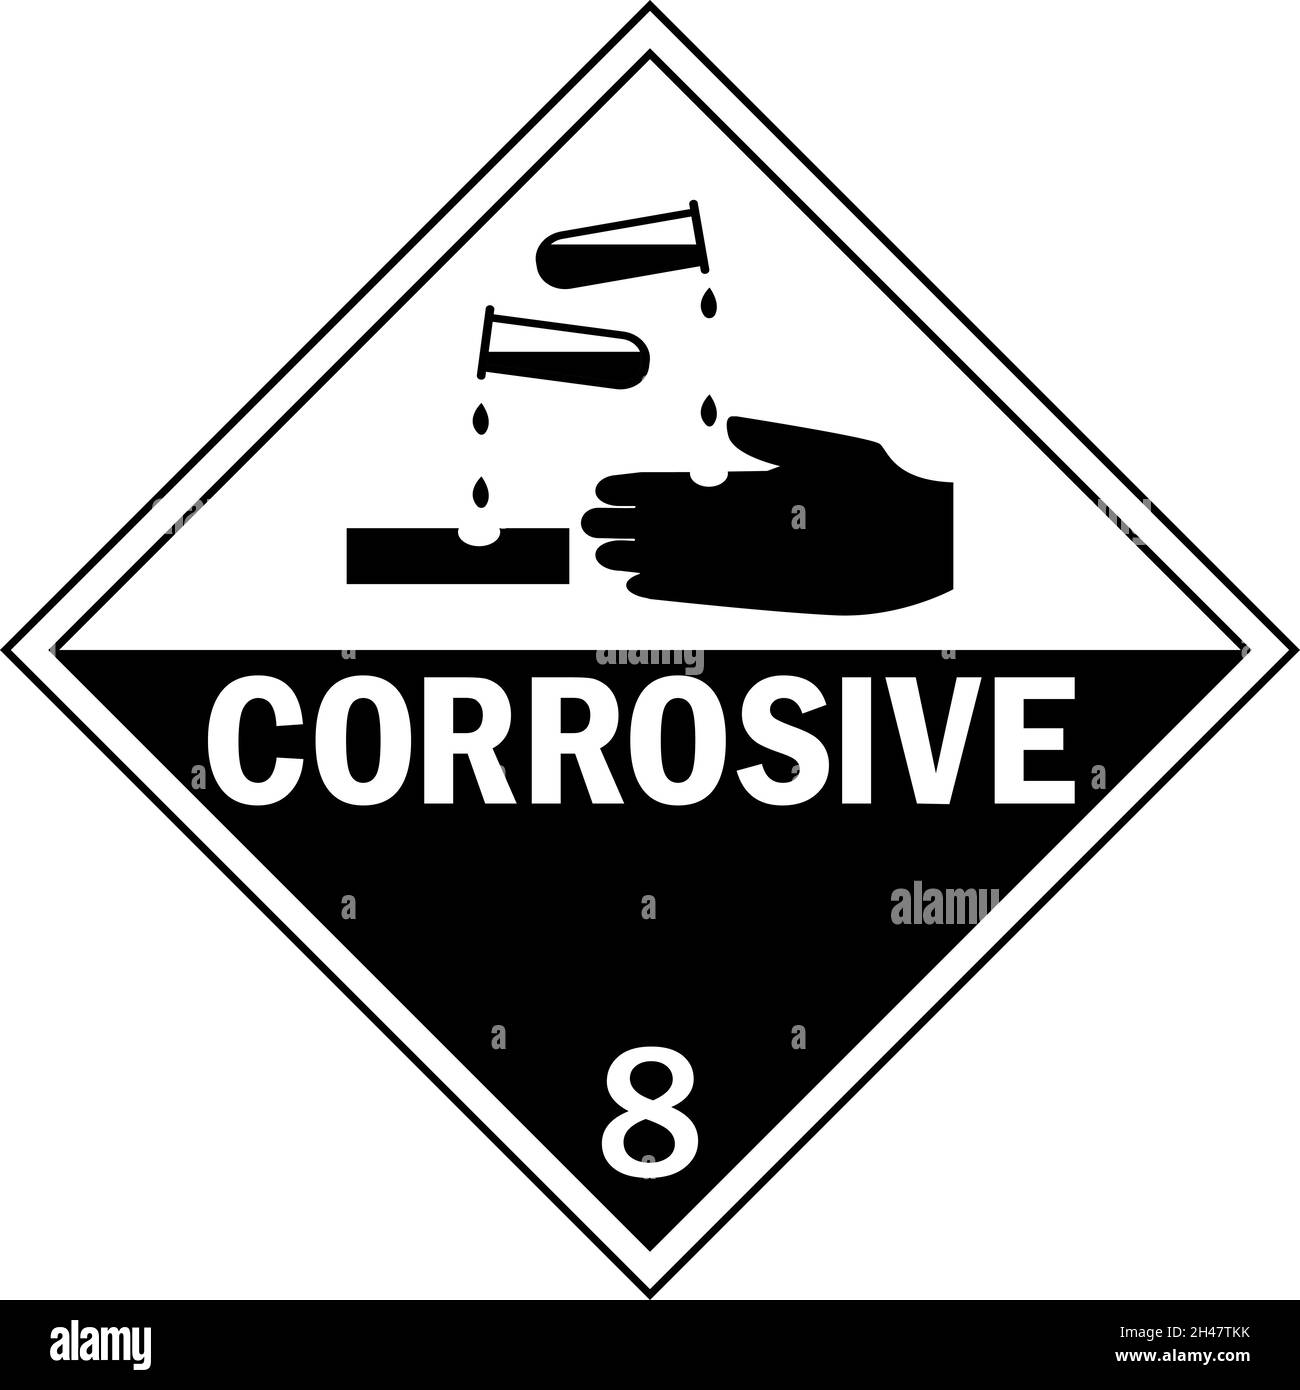 Corrosive hazard placards class 8. Dangerous goods safety signs and symbols. Stock Vector